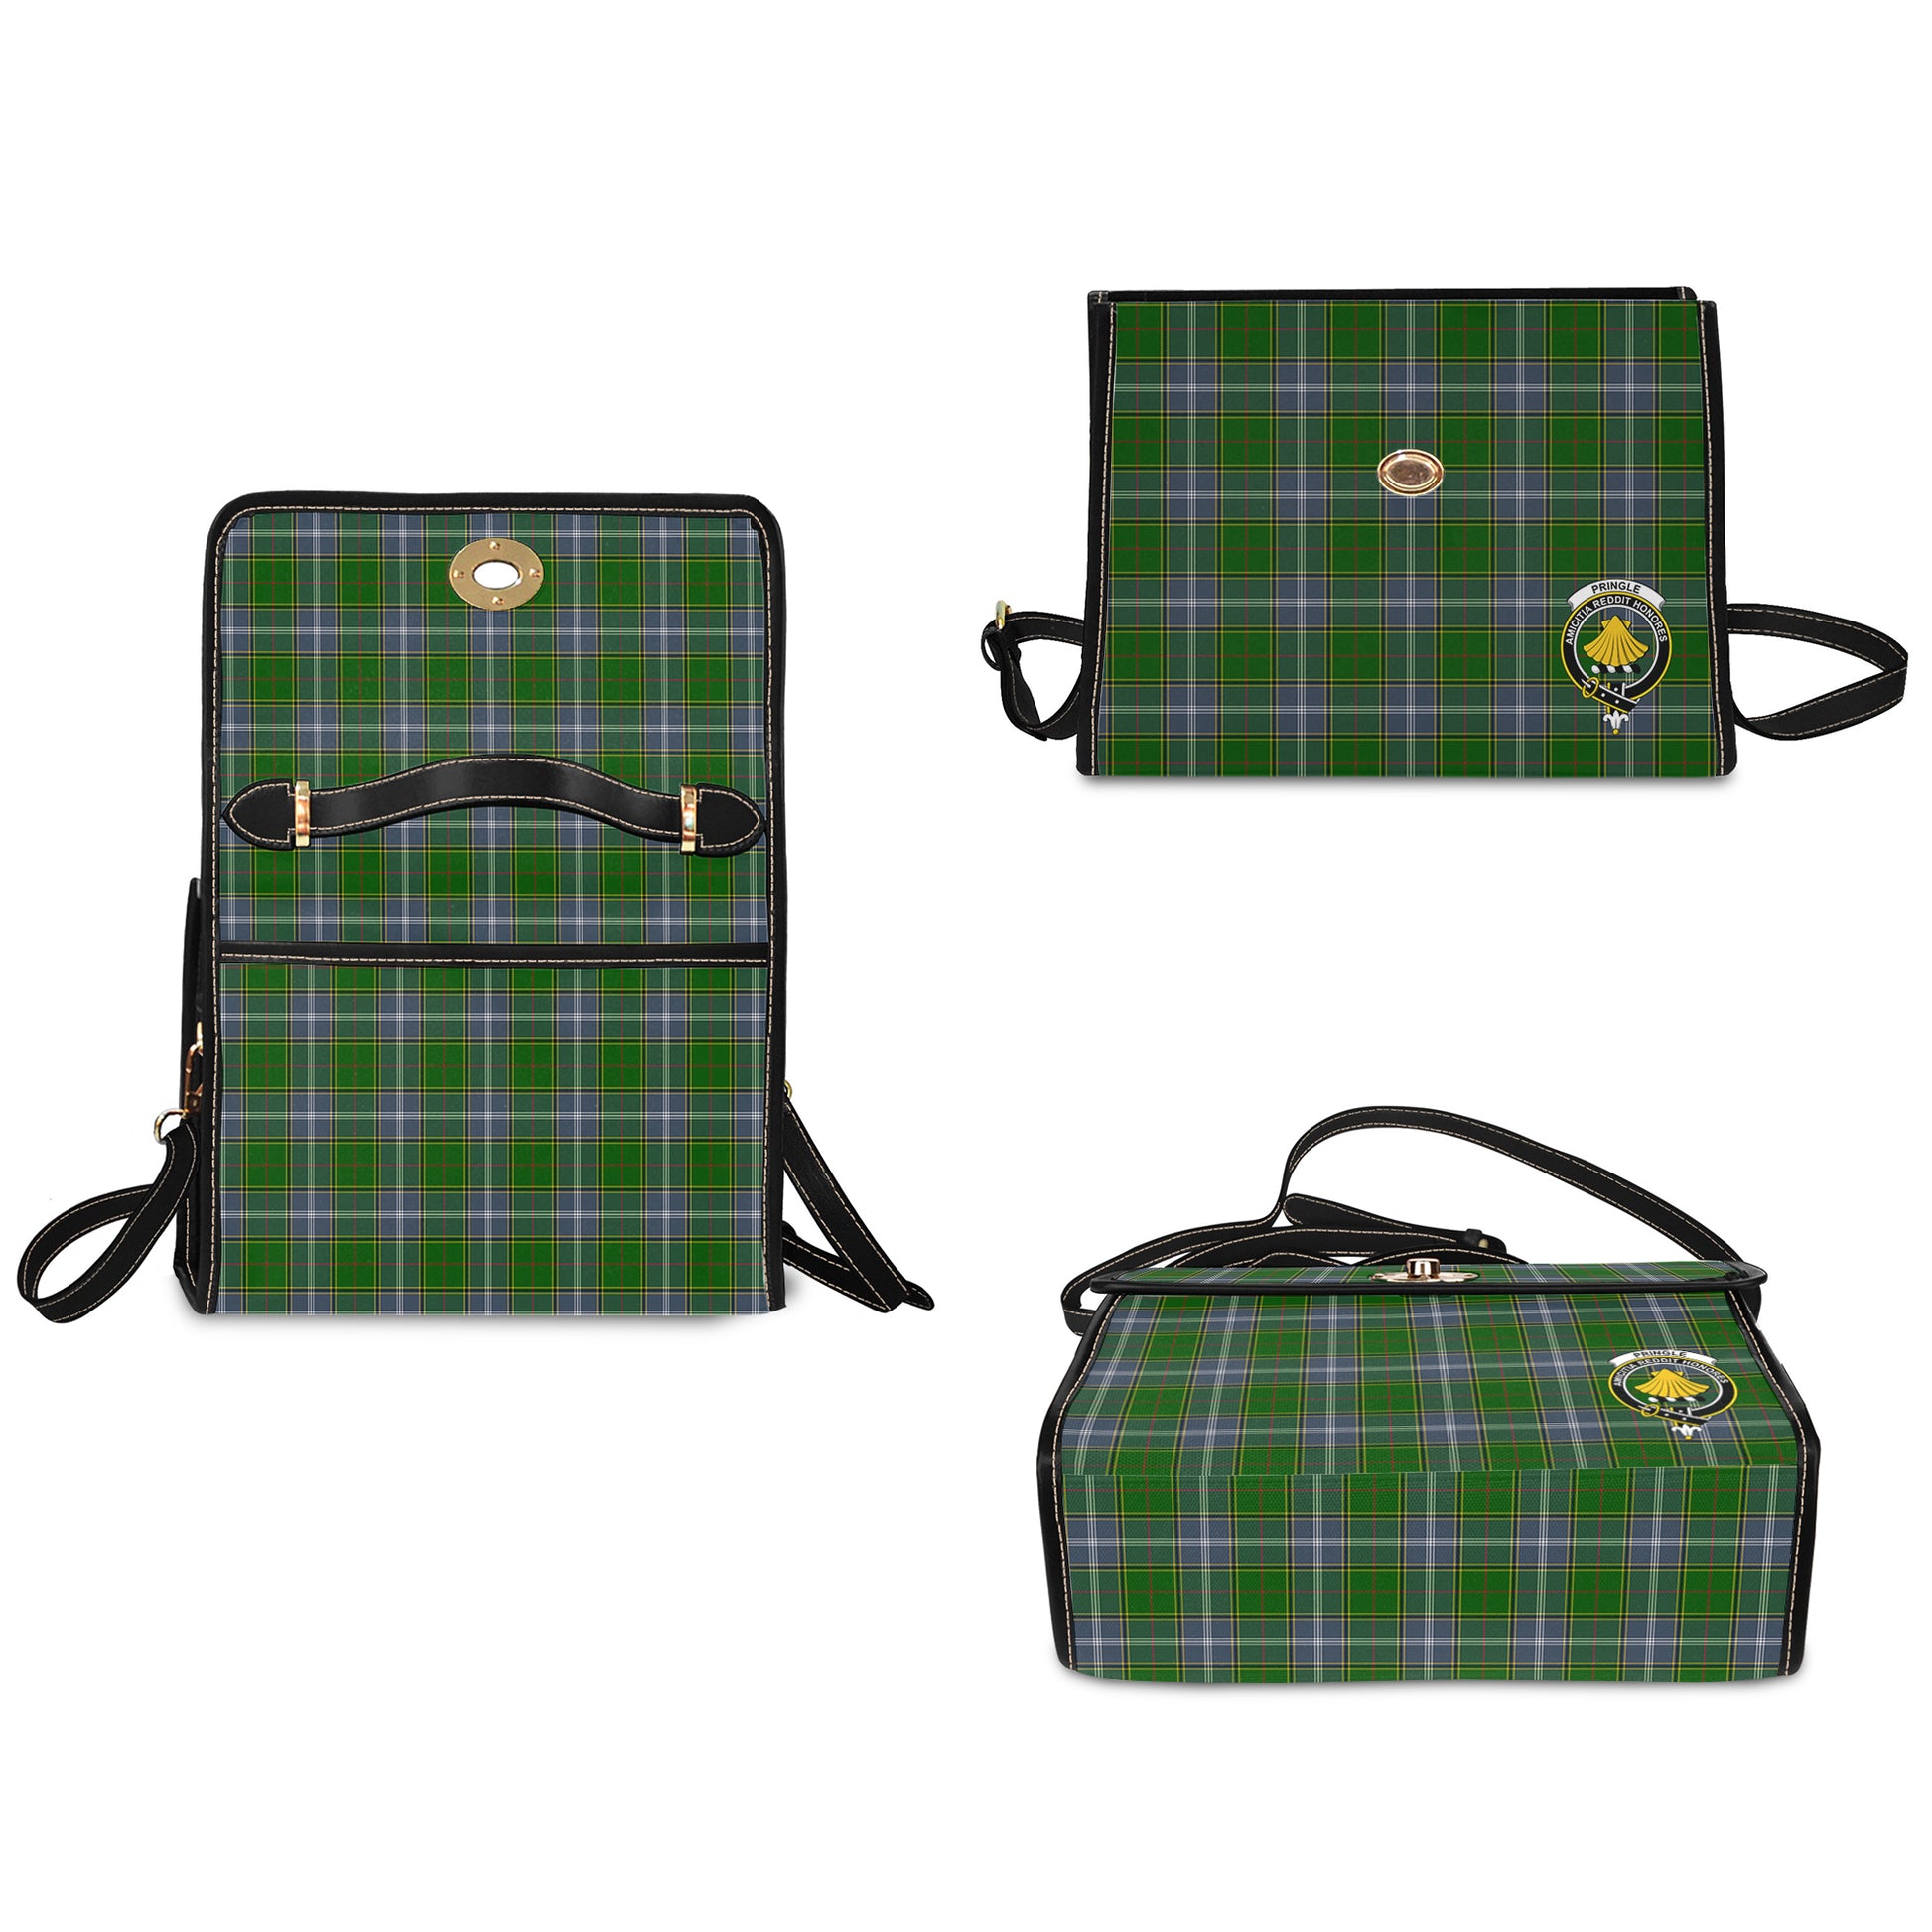 pringle-tartan-leather-strap-waterproof-canvas-bag-with-family-crest